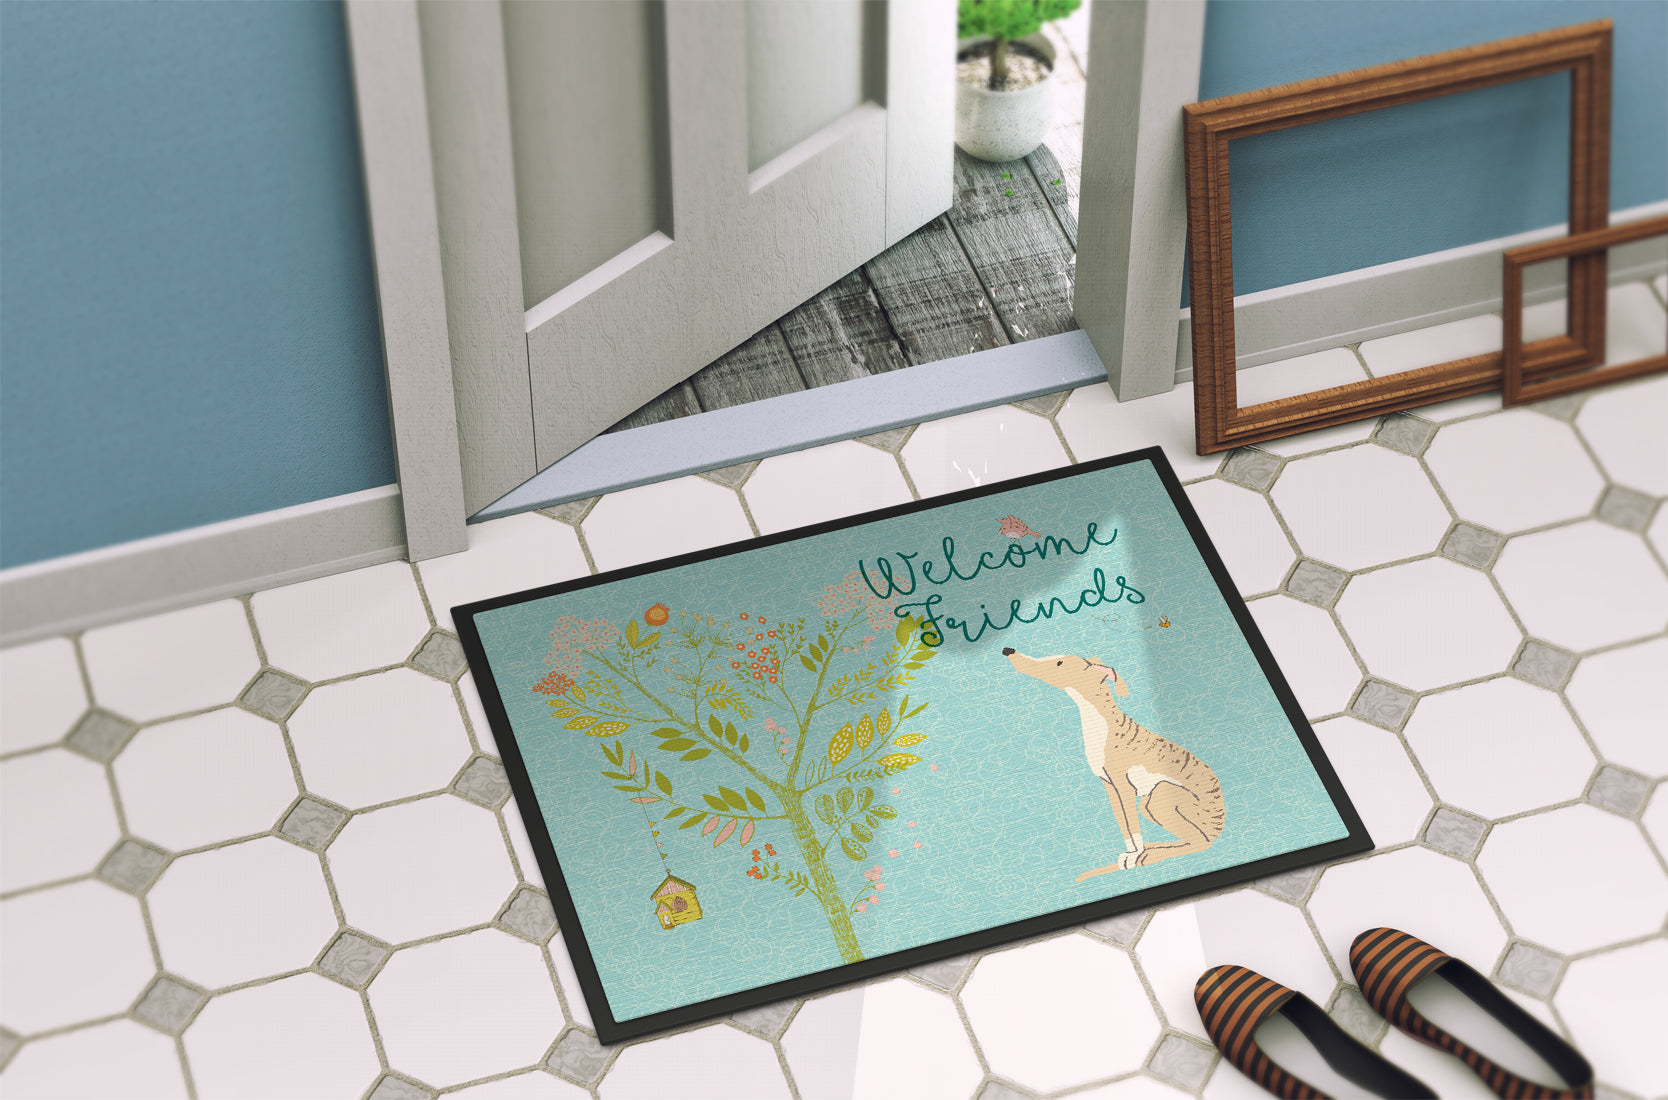 Welcome Friends Brindle Greyhound Indoor or Outdoor Mat 18x27 BB7591MAT - the-store.com